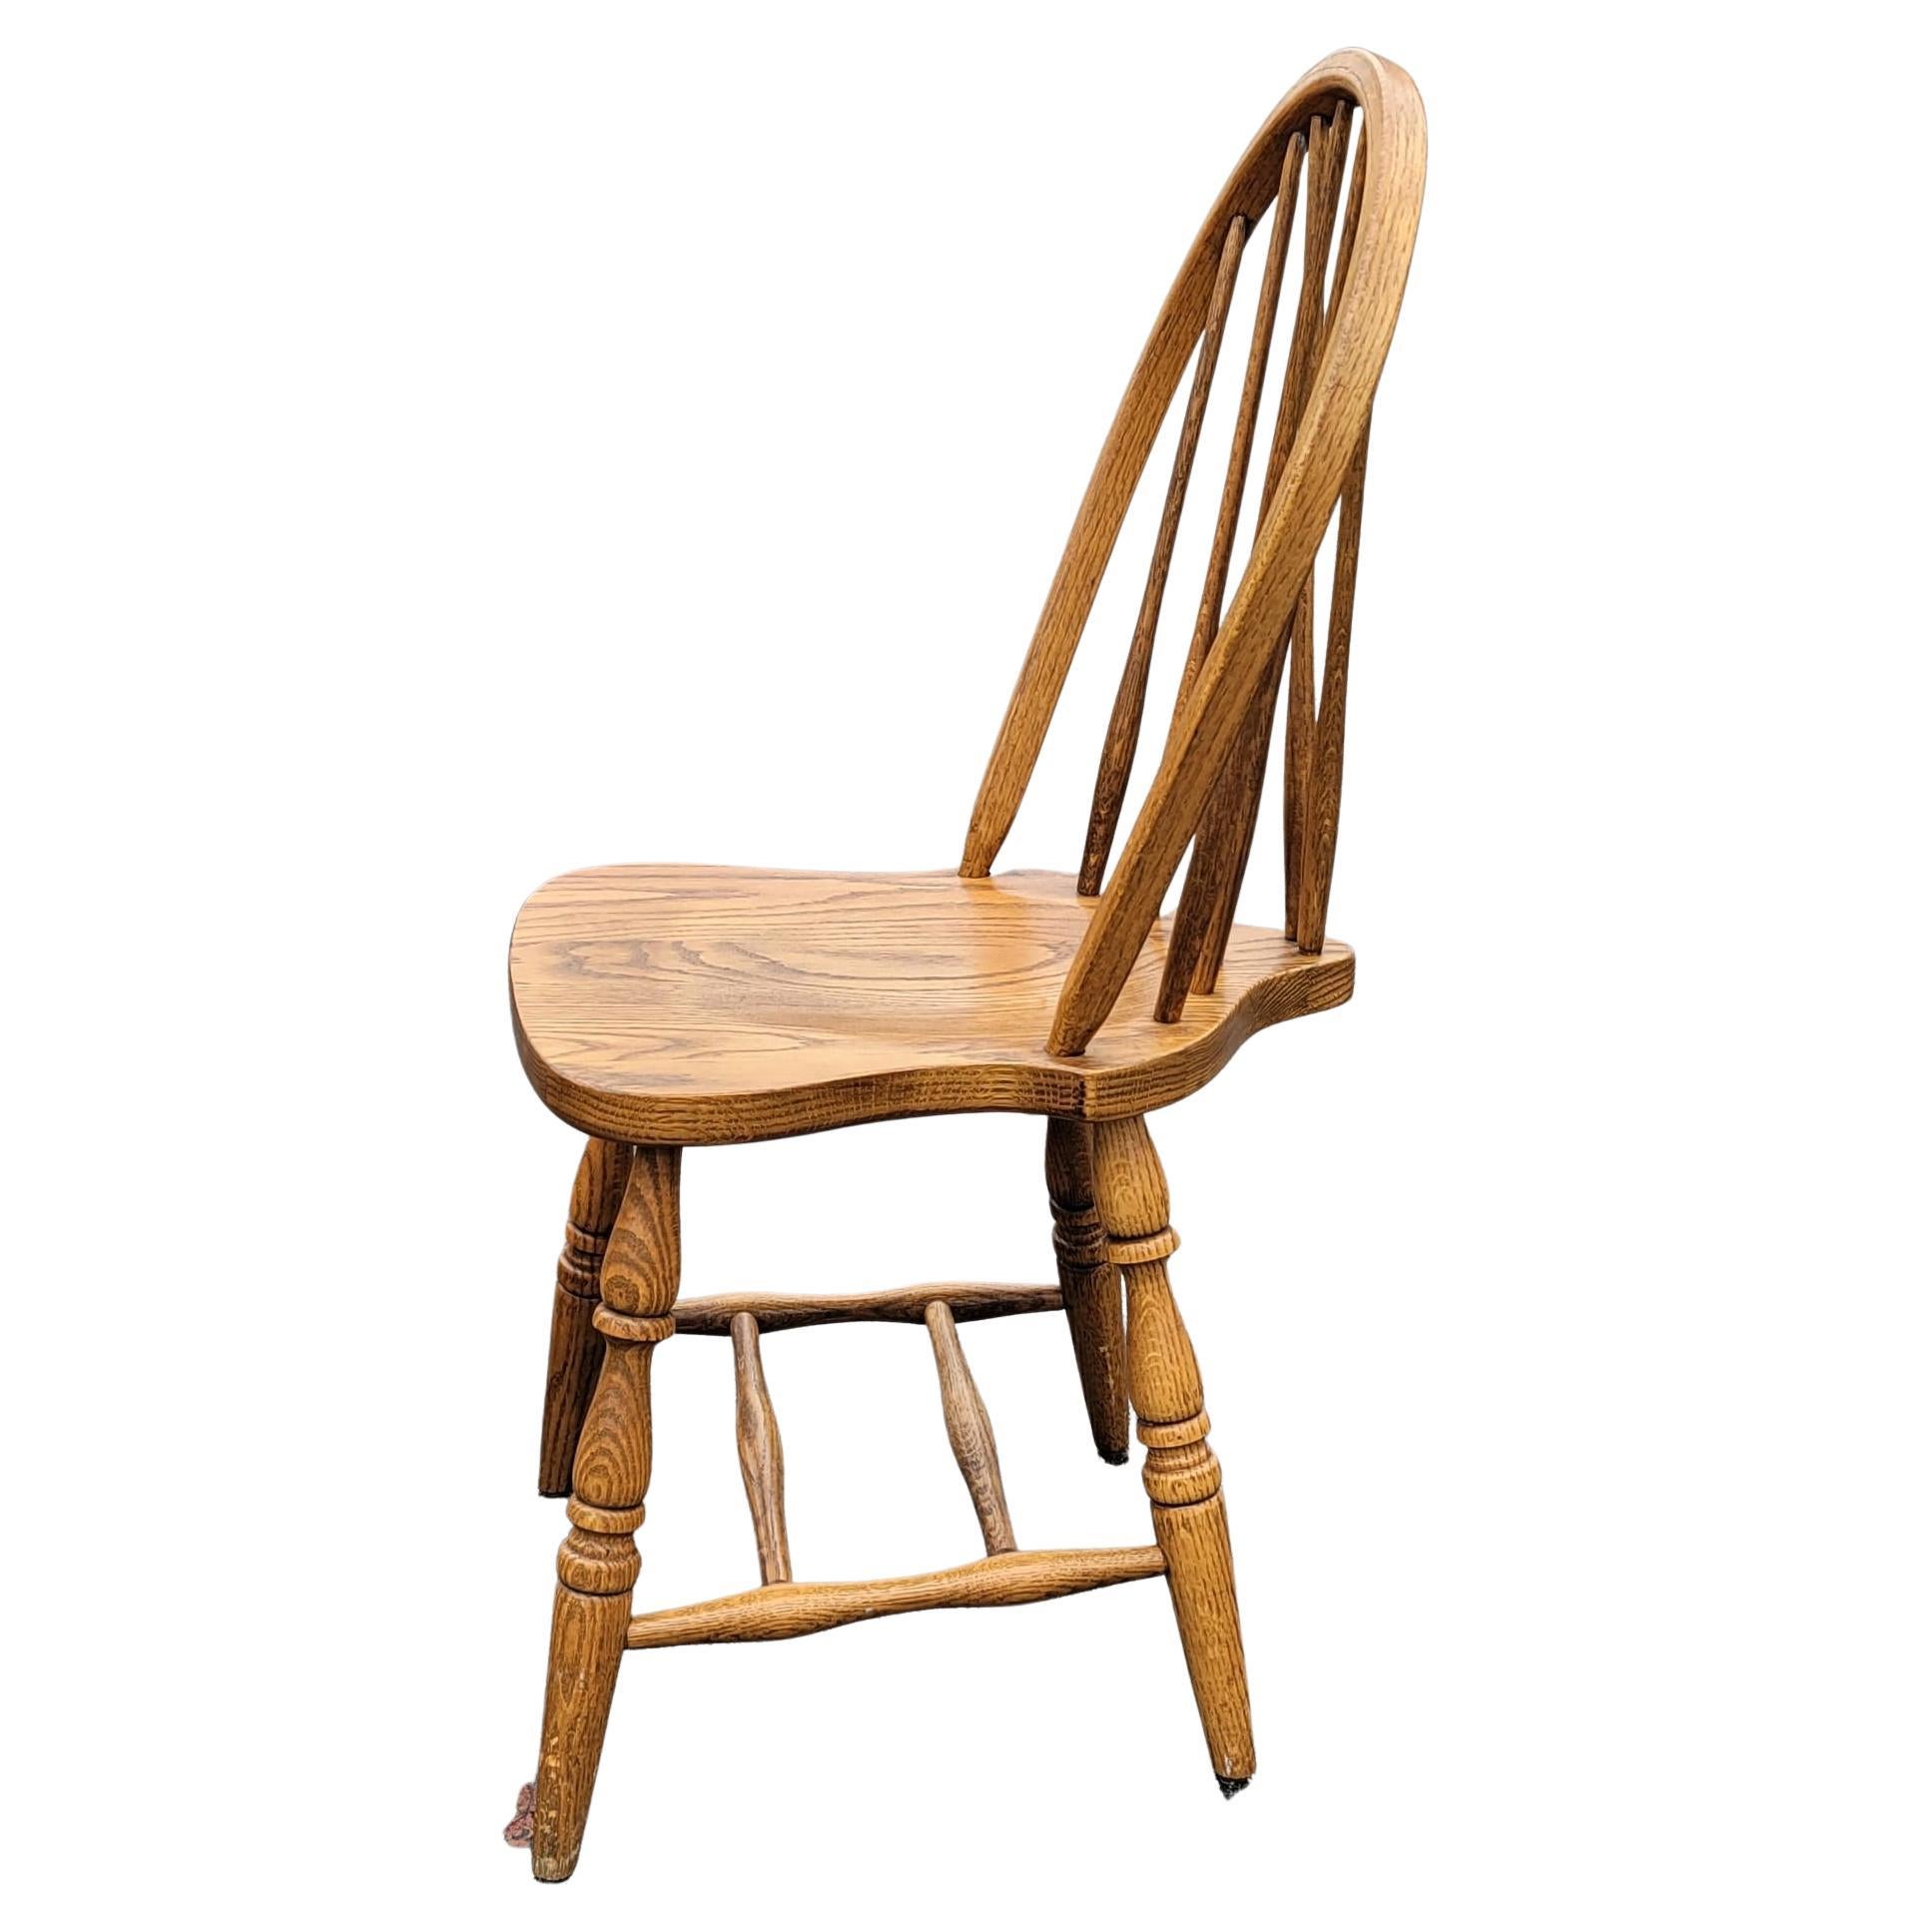 American Arts & Crafts Oak Fiddleback Windsor Chairs, Pair In Good Condition For Sale In Germantown, MD